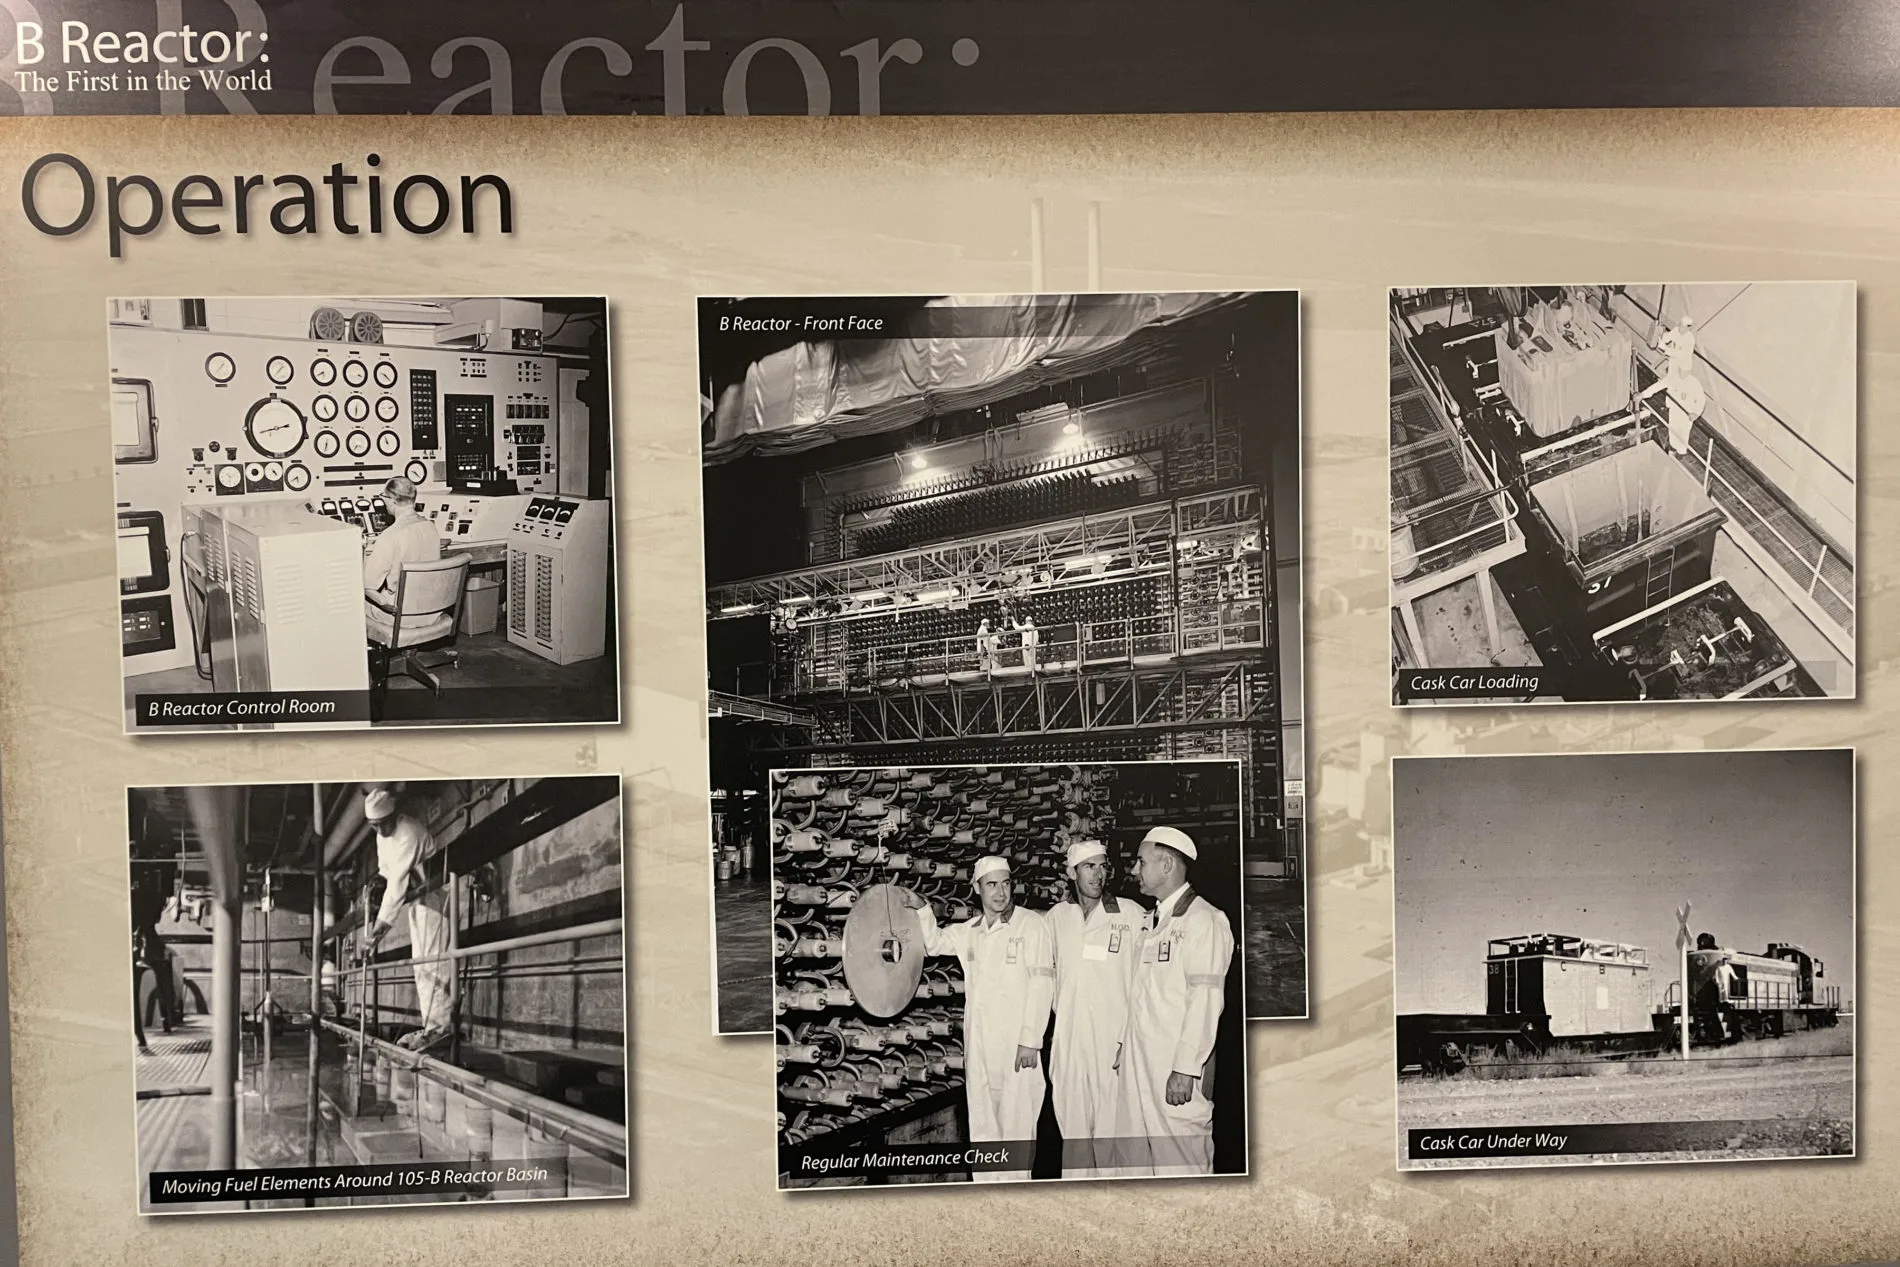 Part of the Hanford tour, shows the stages of operation at the Hanford B Reactor.